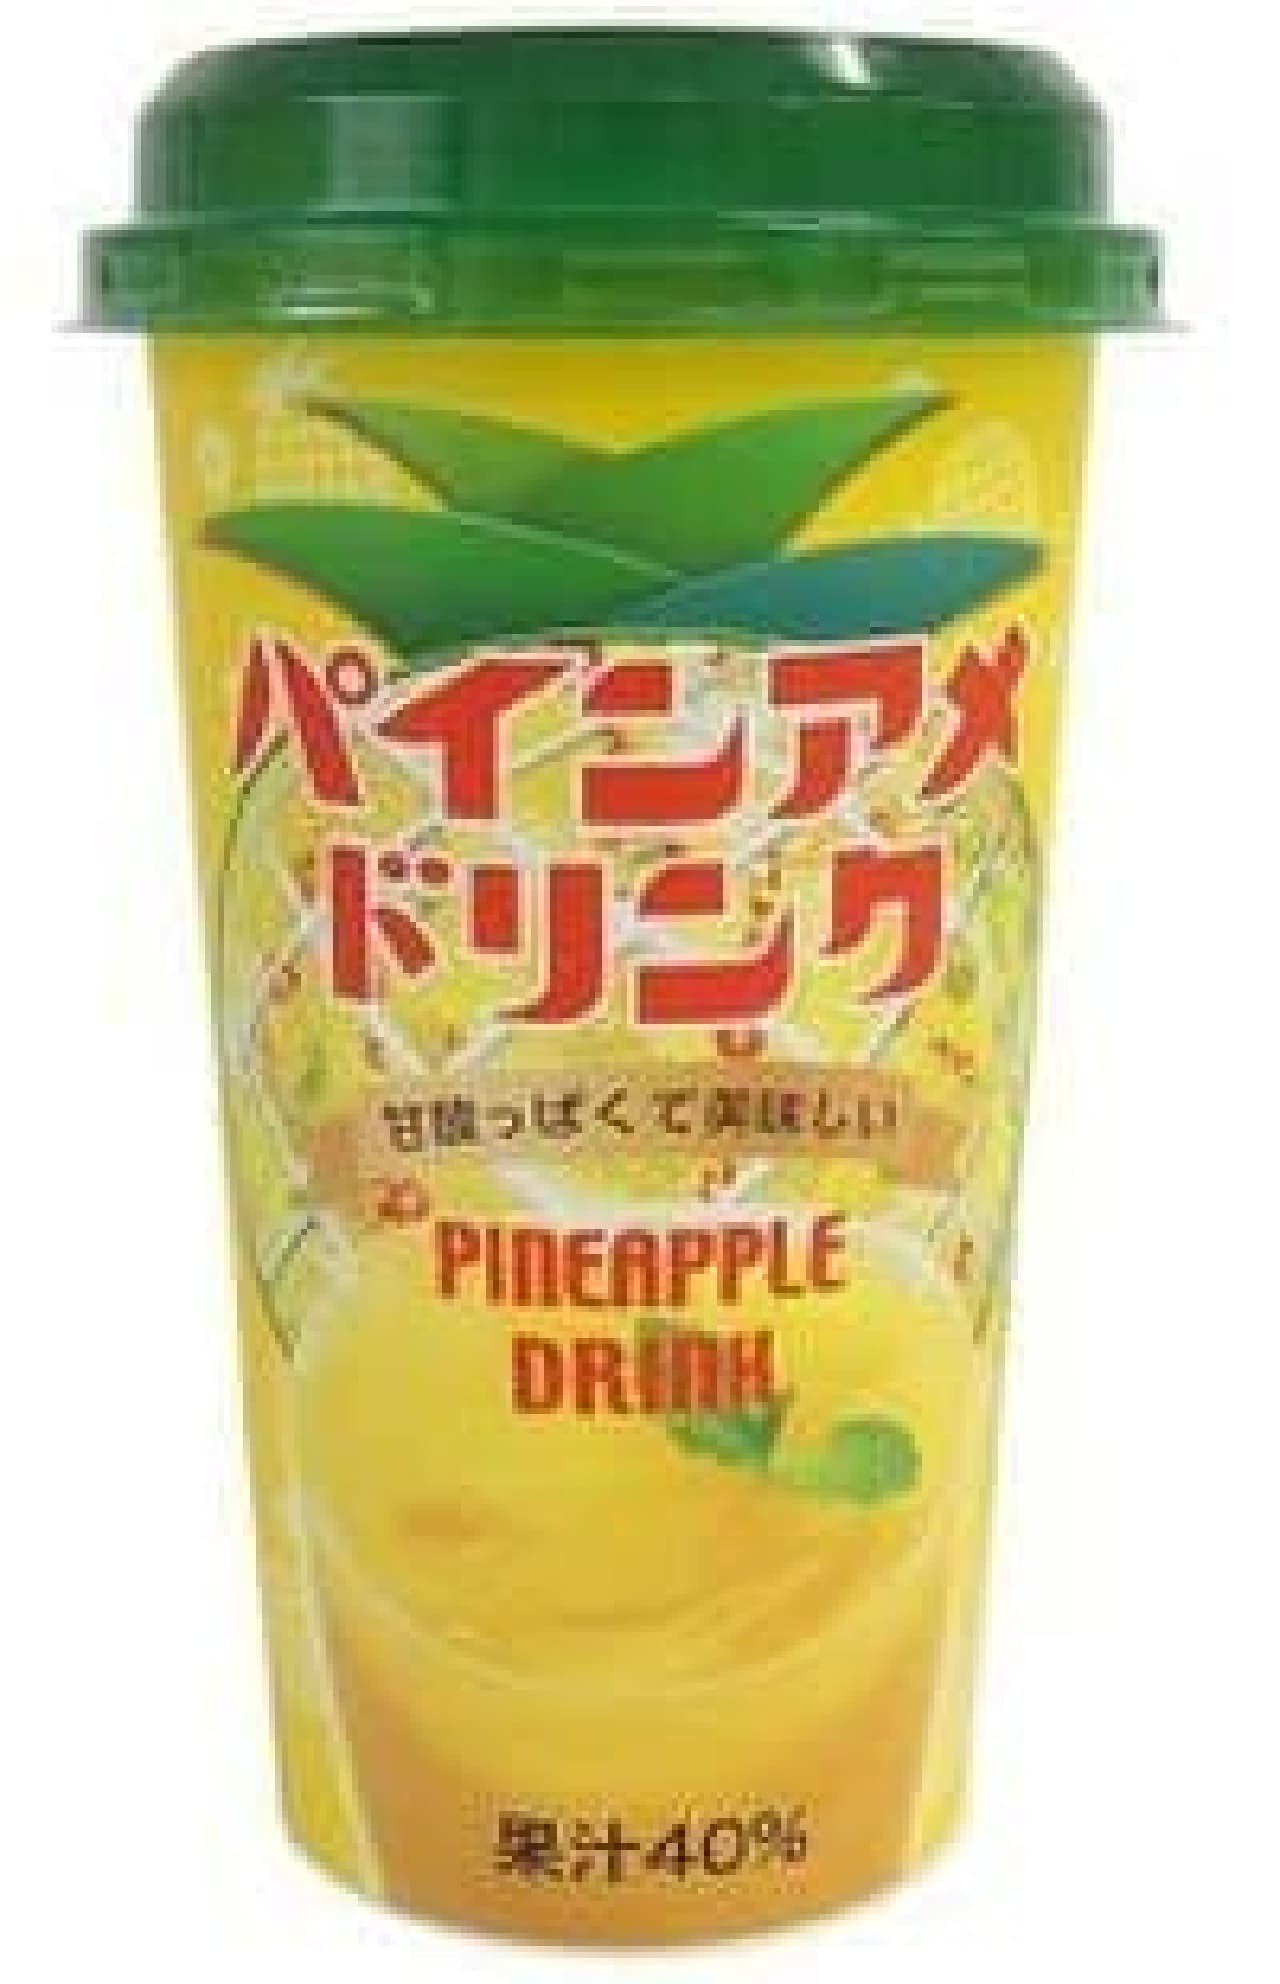 Reproduce the taste of pine candy! "Pine candy drink"